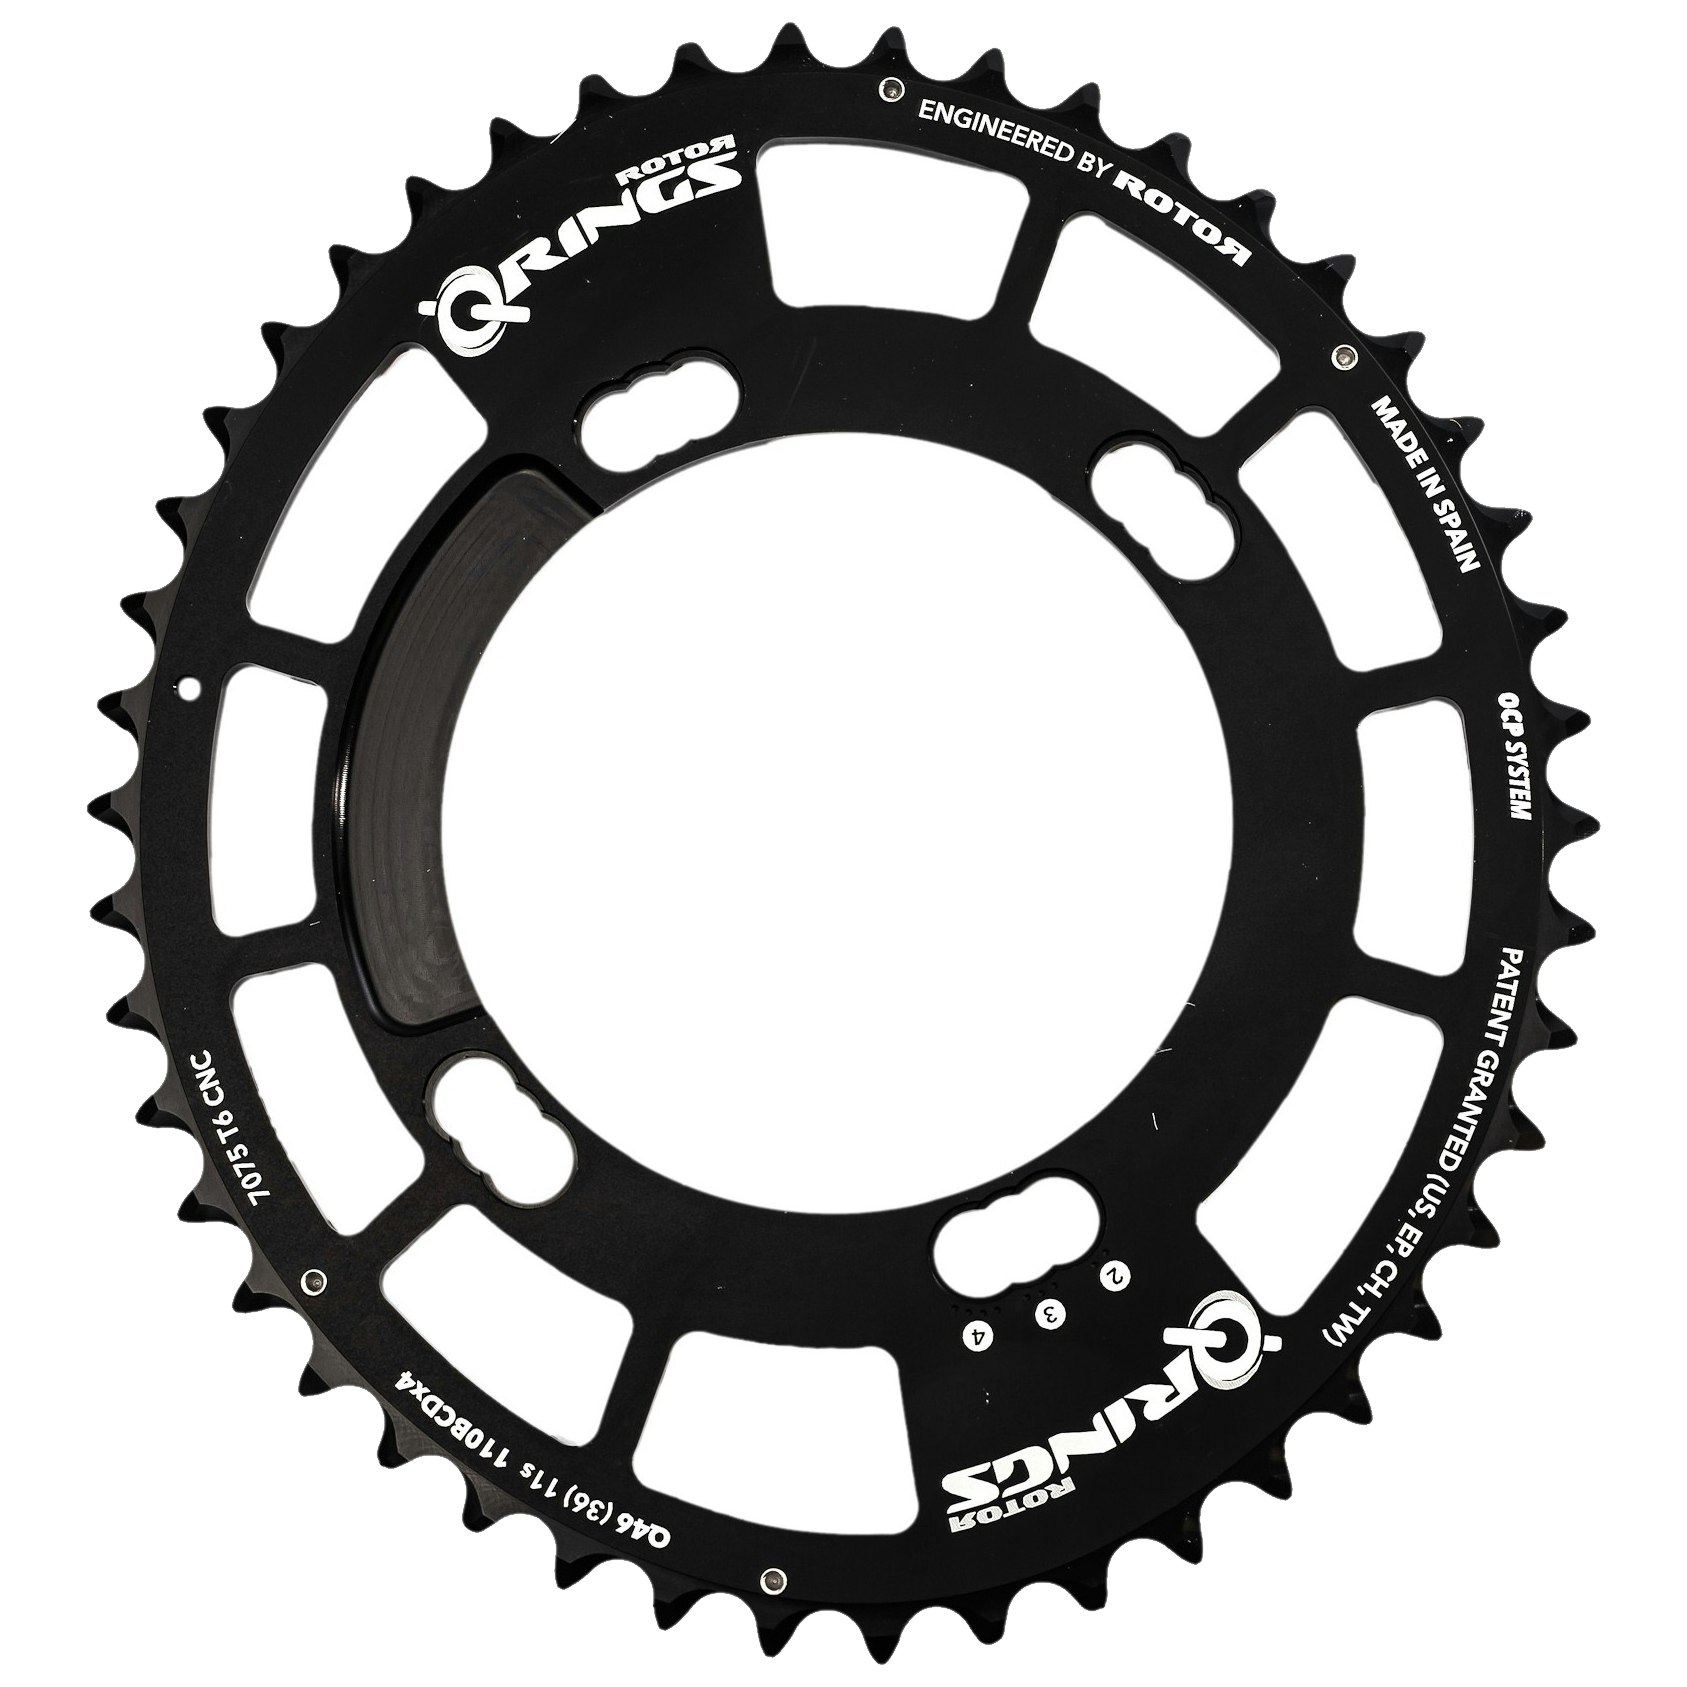 Wolf Tooth 96 mm BCD Chainrings for XT M8000  SLX M7000 | Jenson USA